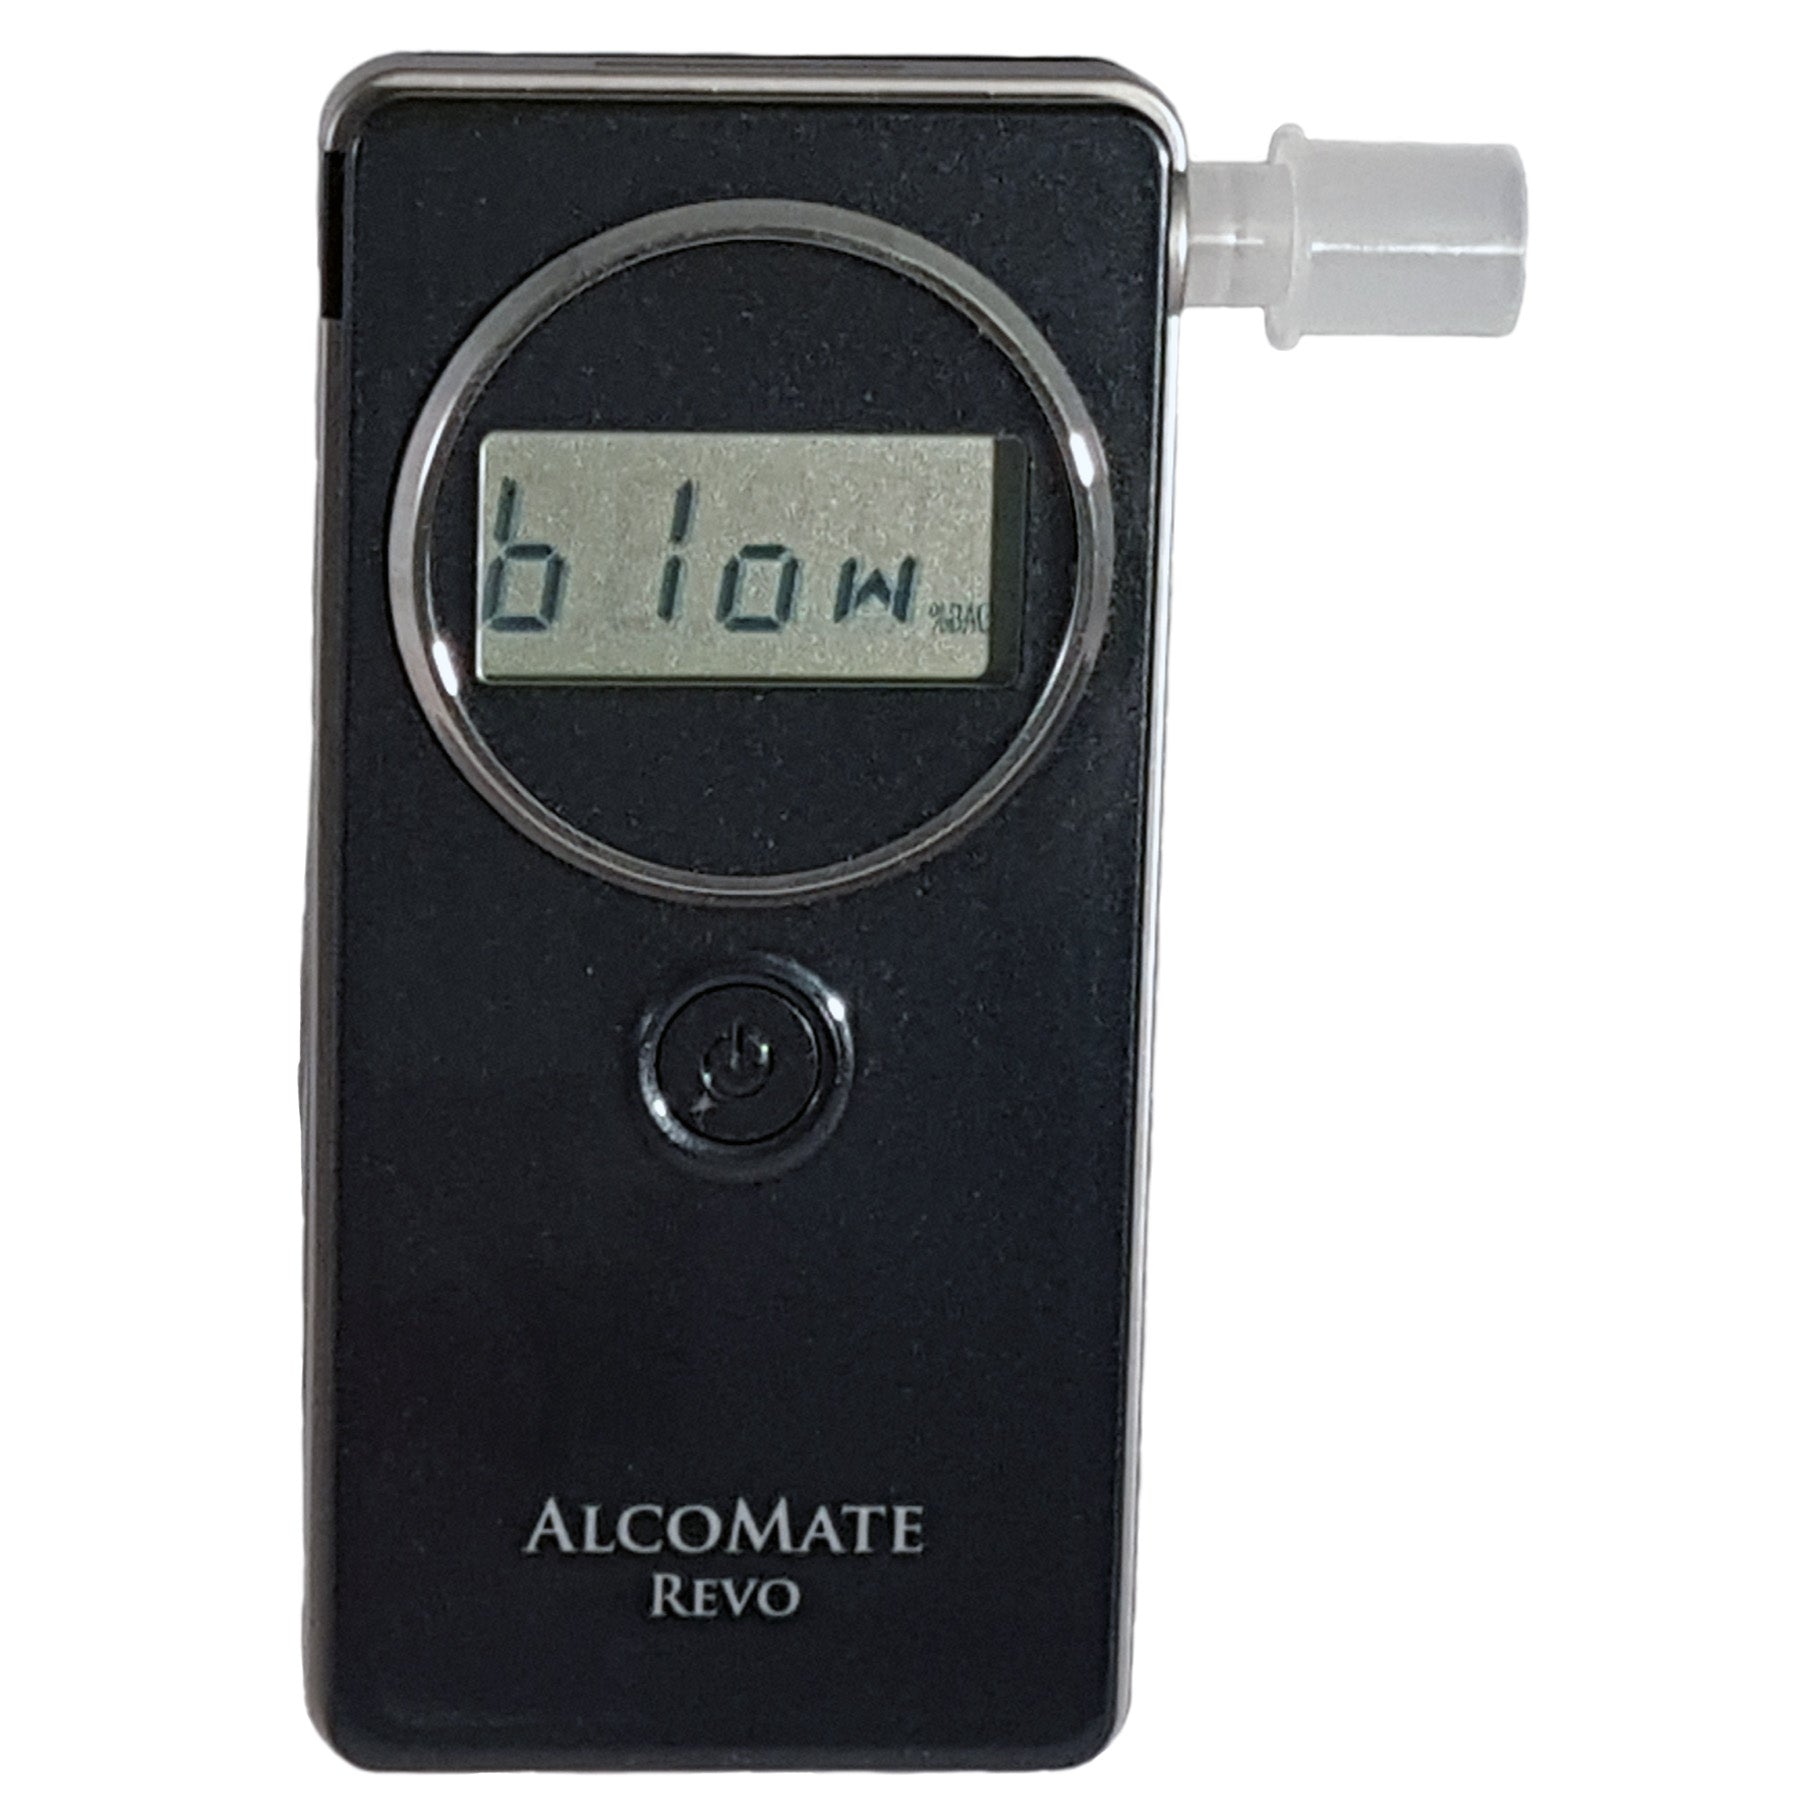 AlcoMate TS200 Fuel Cell Breathalyzer with Deluxe Case